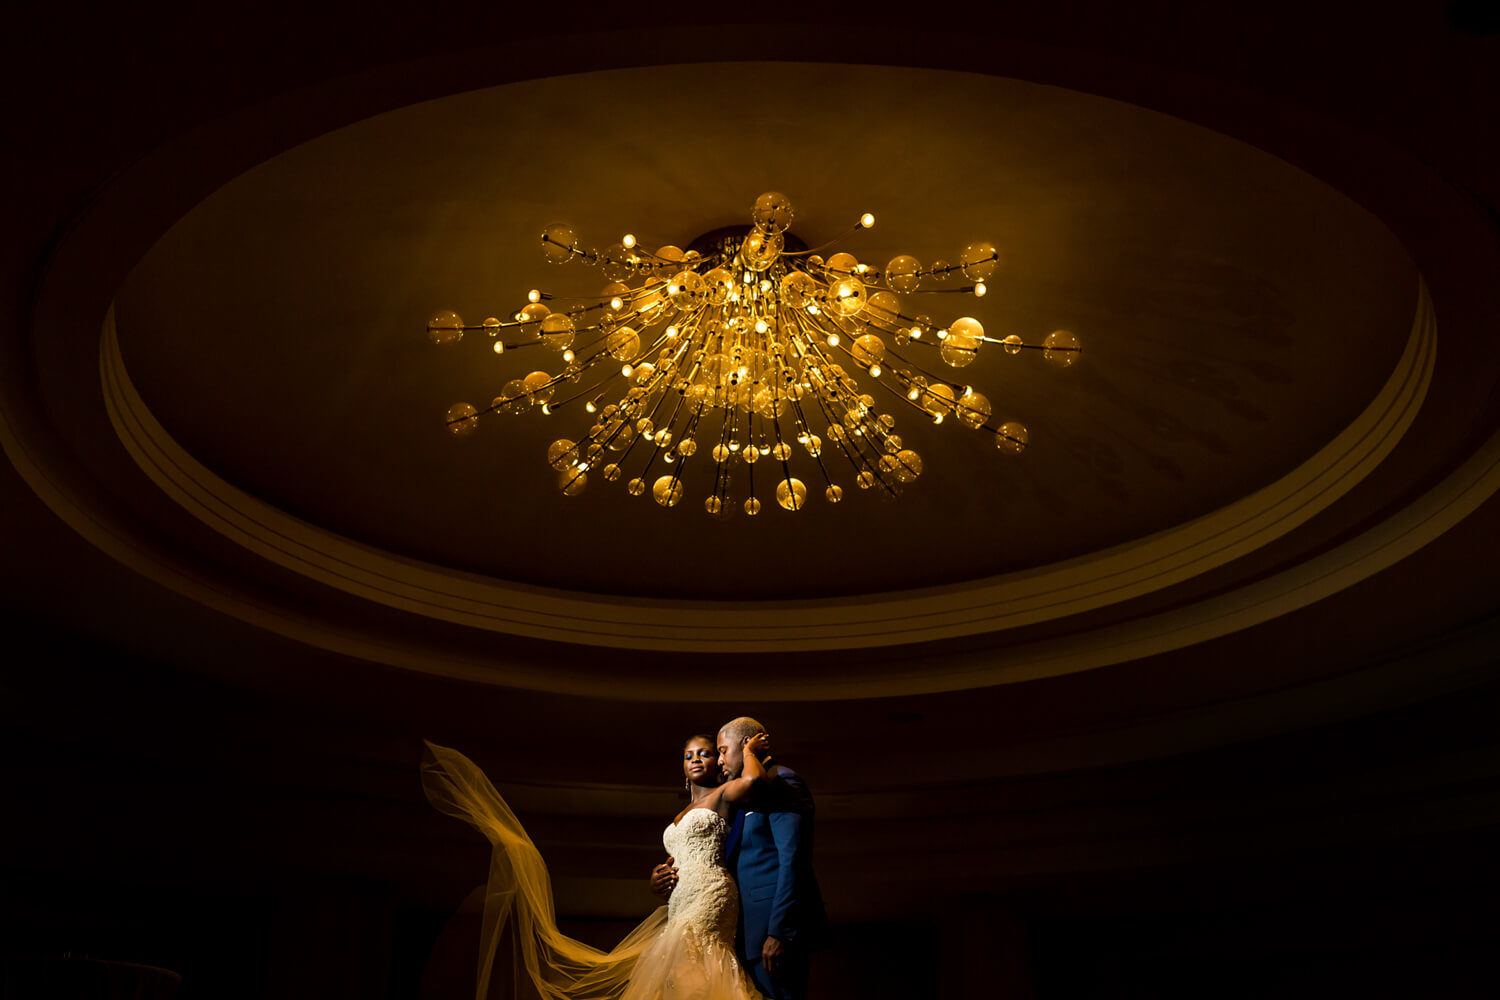 this is a dramatic photo of a black couple under a chandelierm the room is dark except for the gold glow of the light above them, they are embracing and her veil is flying in the air, Georgetown DC